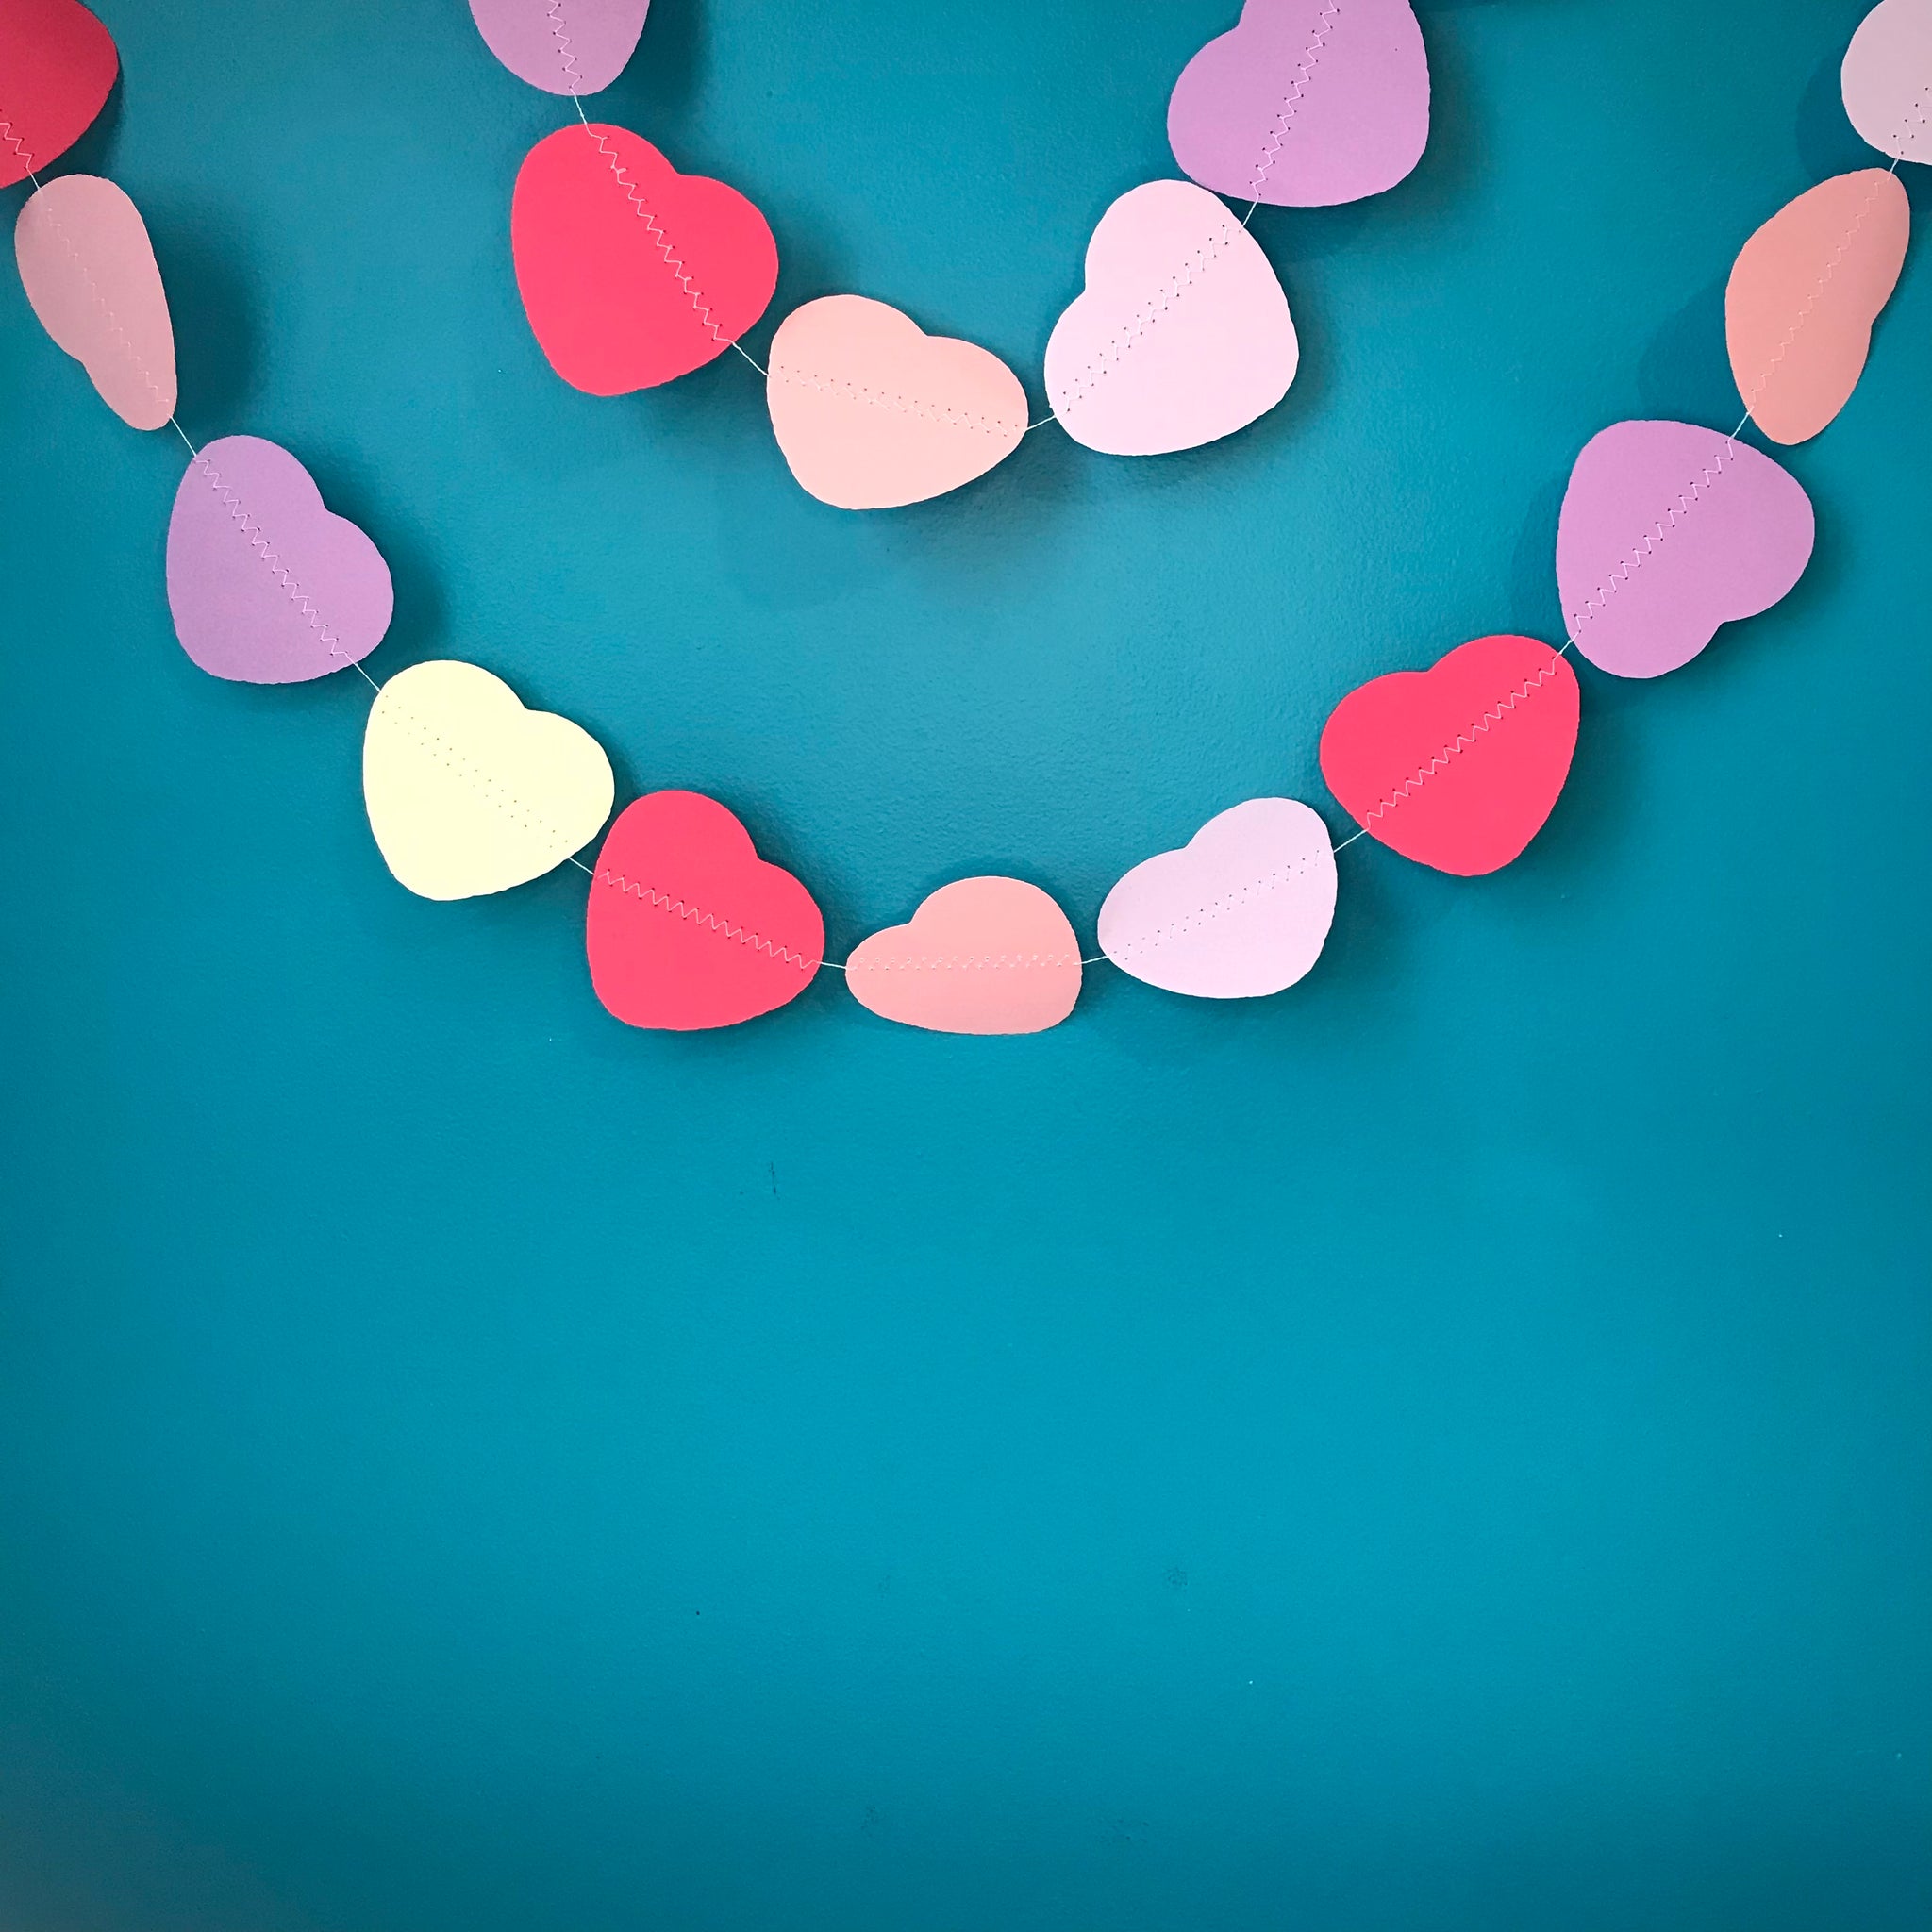 Two strings of pink and purple hearts are shown against a blue background